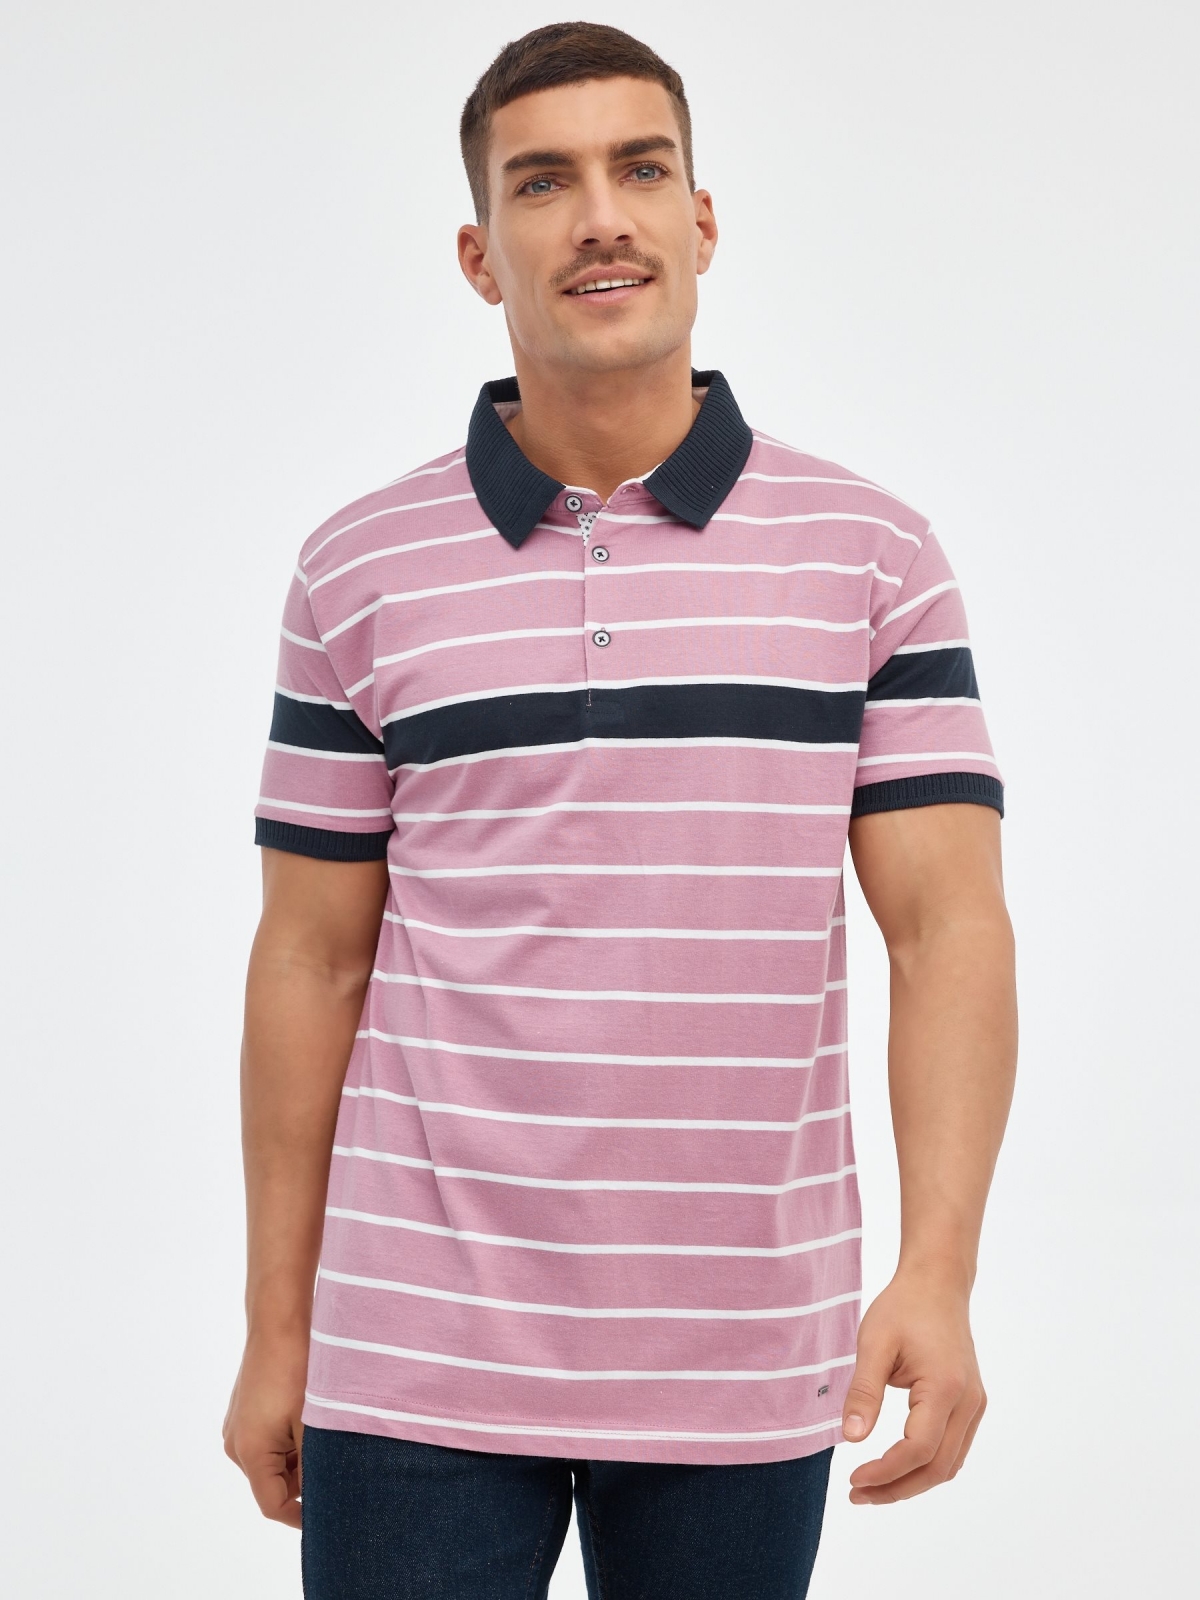 Contrast striped polo shirt purple middle front view